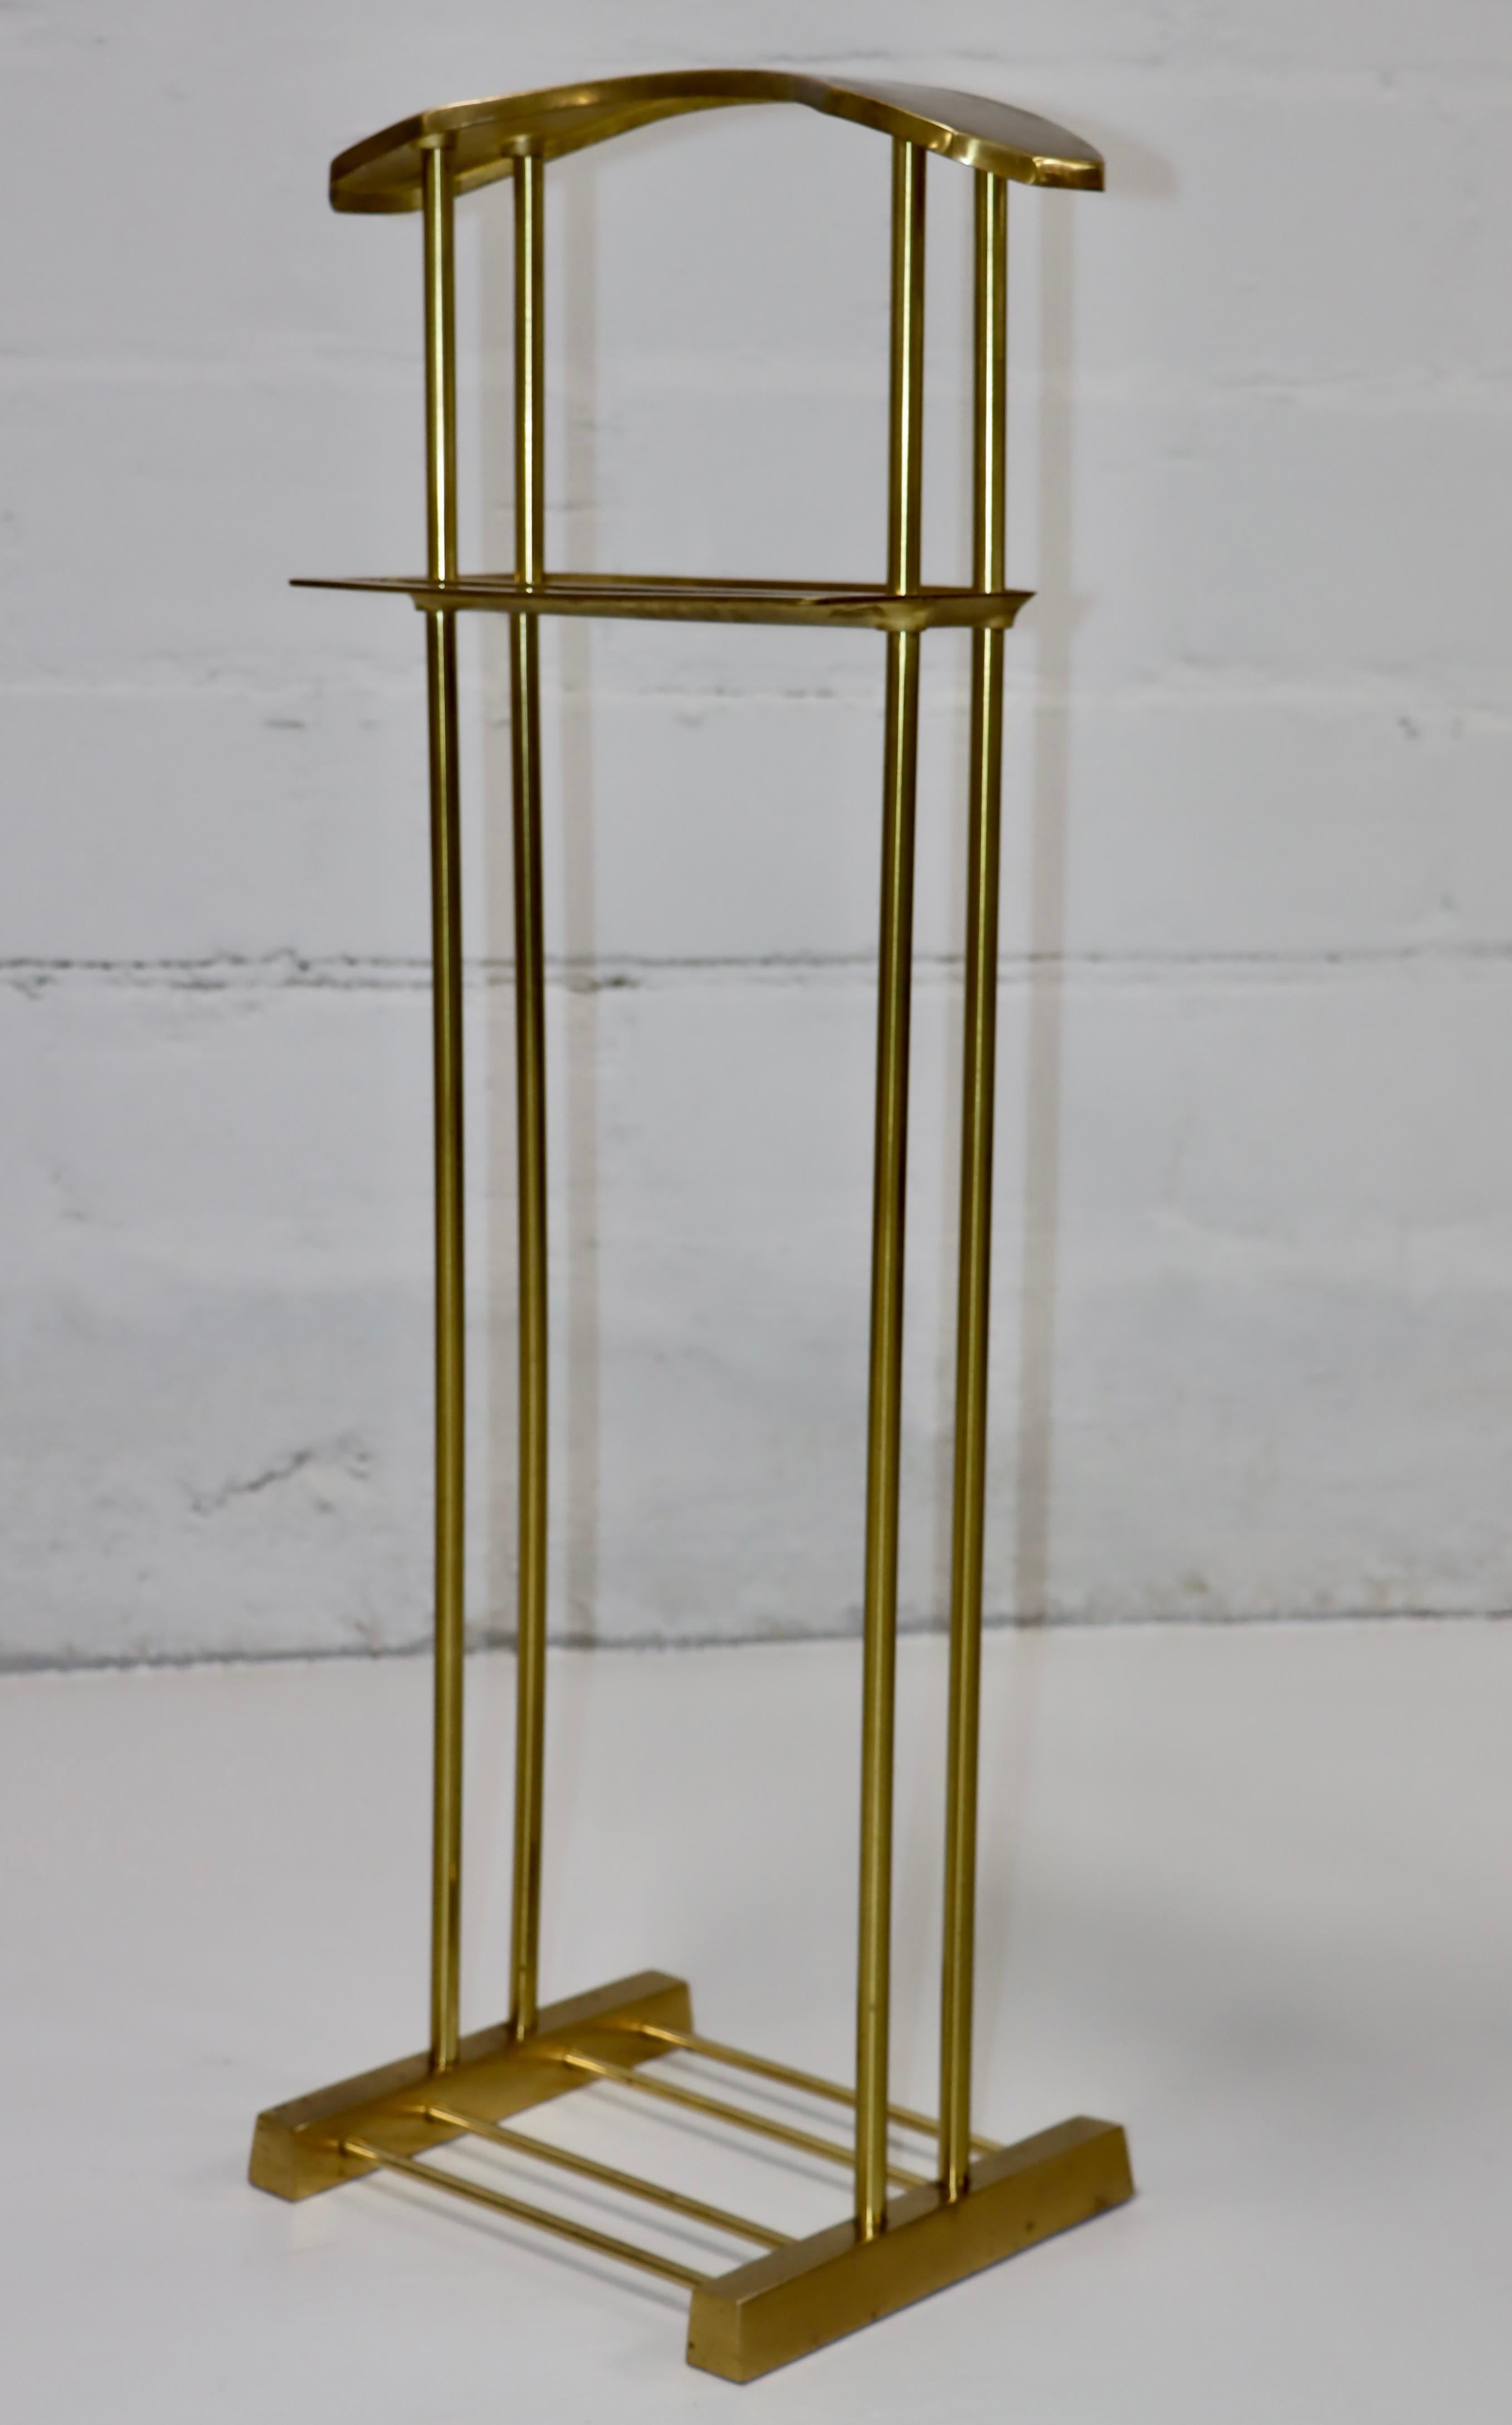 1980's Modernist Brass Valet Stand By Decorative Crafts Inc. For Sale 7